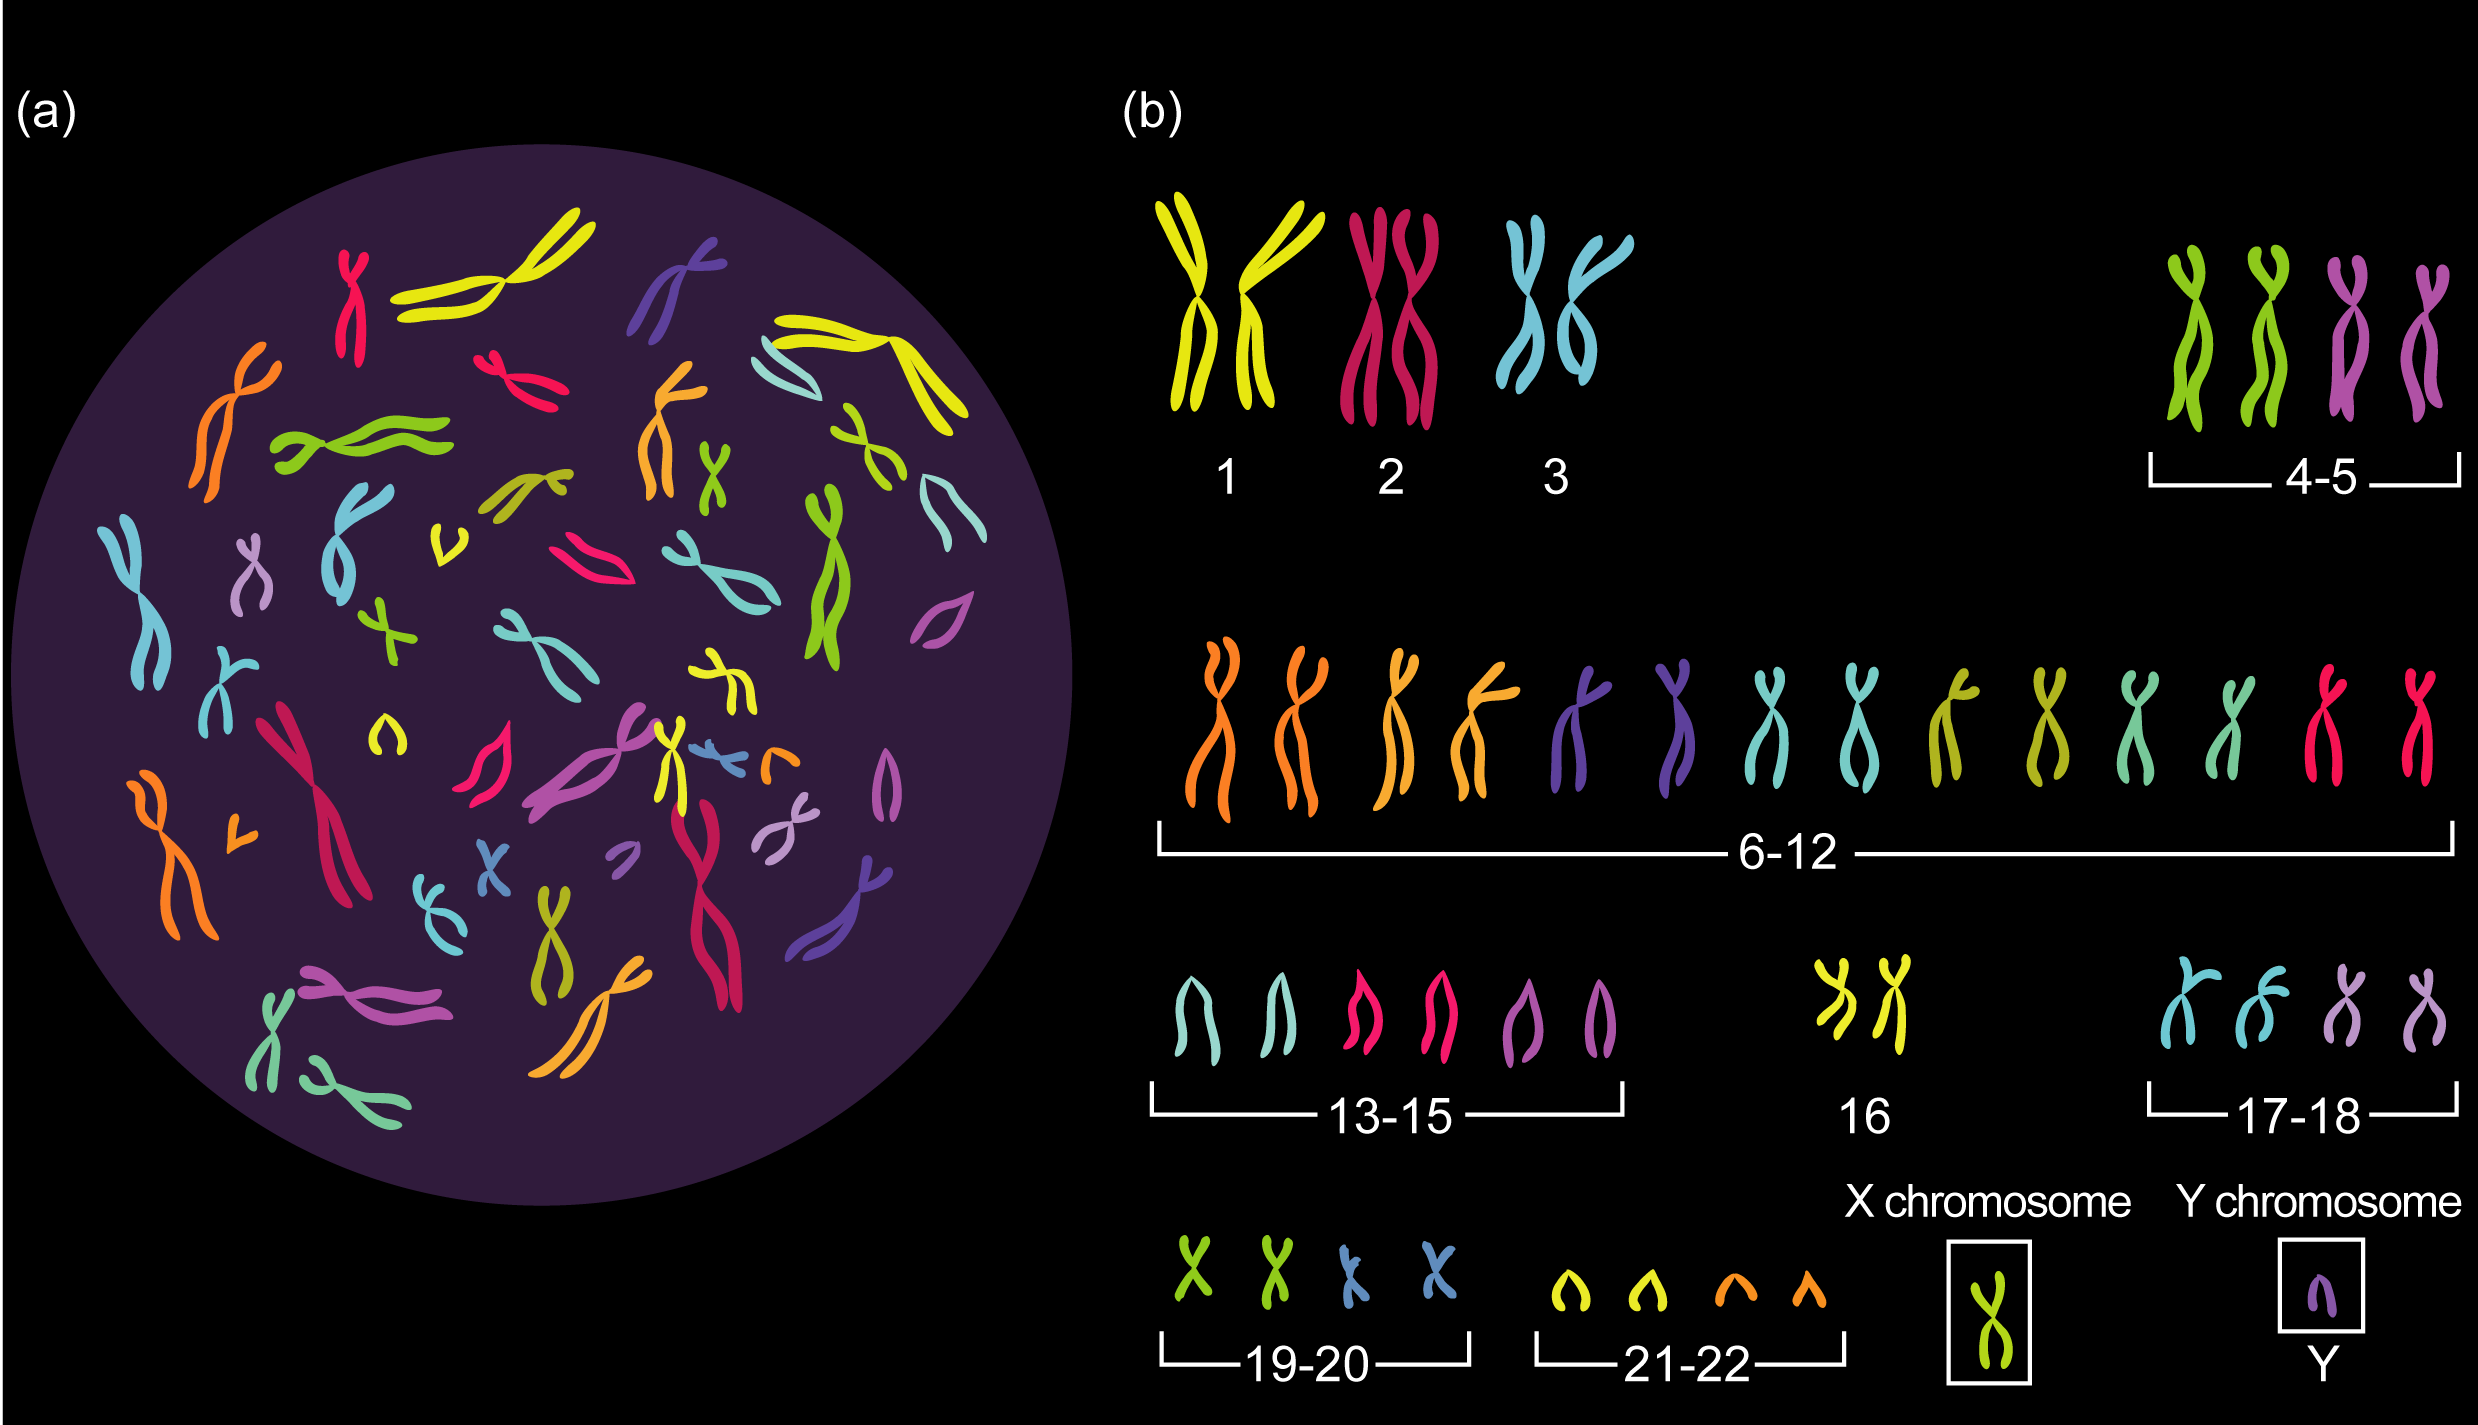 23-chromosomes-in-humans-the-engineering-internship-cover-letter